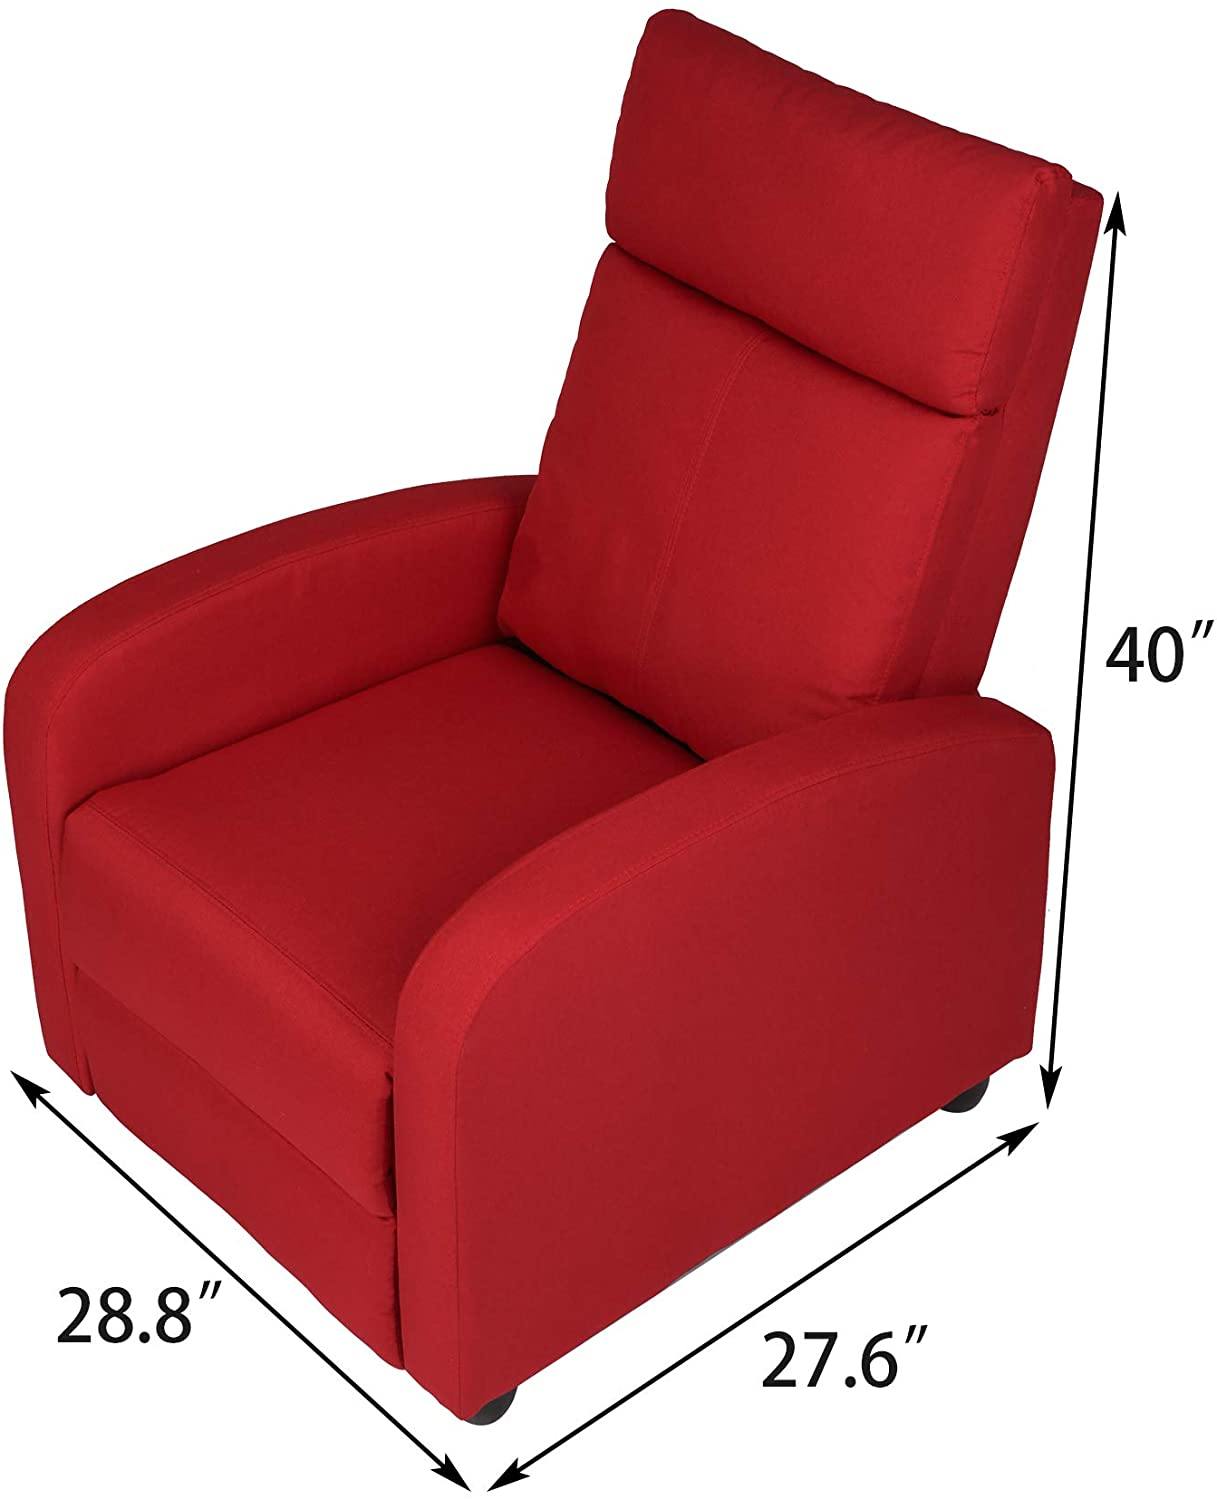 Fabric Recliner Chair Adjustable Single Sofa Home Theater Seating Recliner Reading Sofa for Living Room & Bedroom, Red - Bosonshop